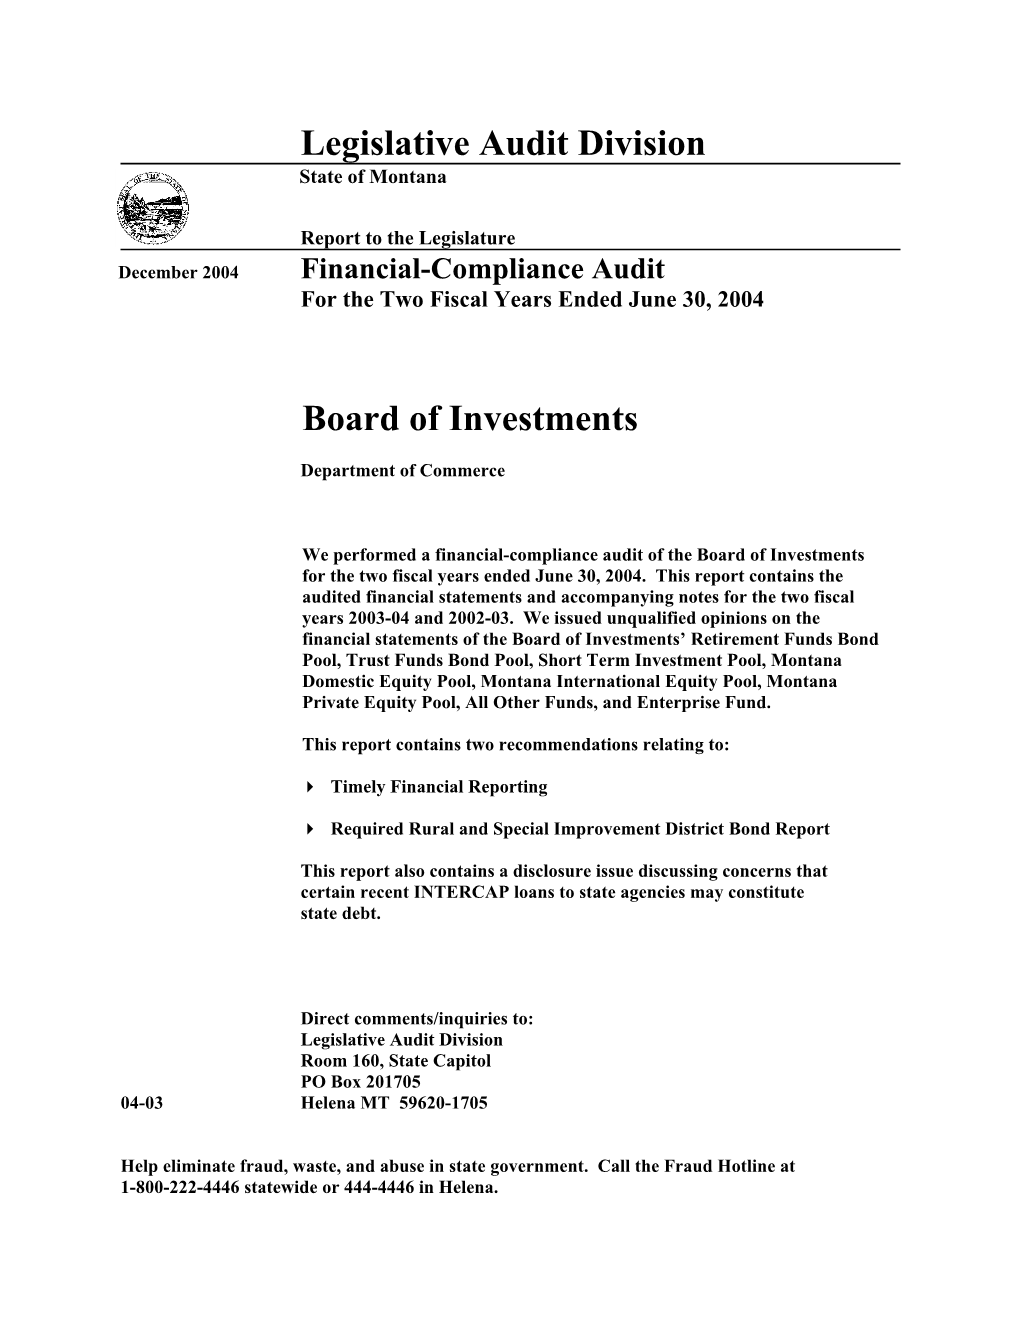 Board of Investments F/C Report